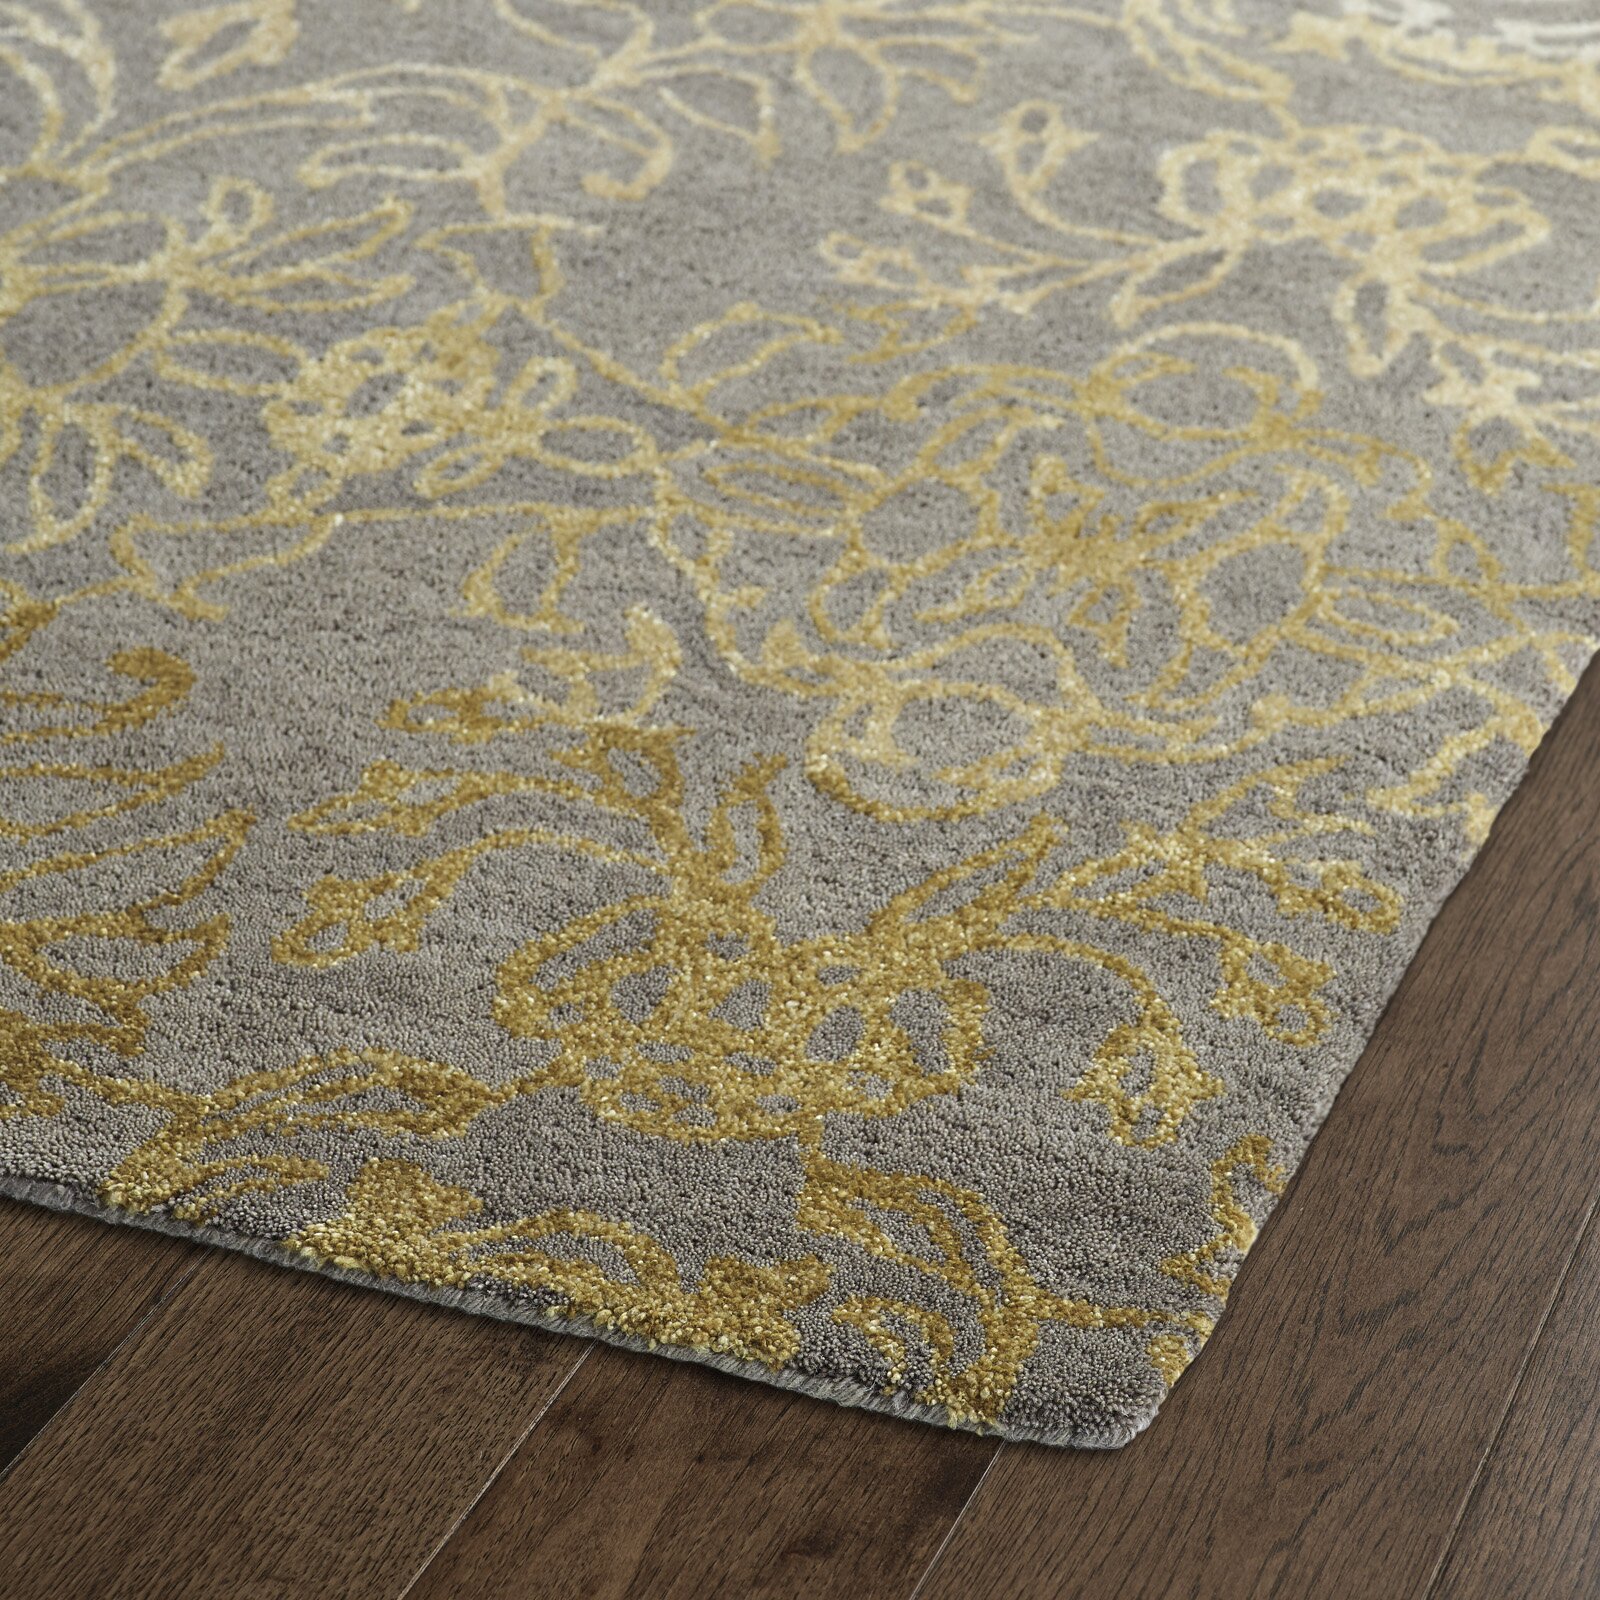 Grey And Gold Rug Safavieh Allure Alr A Grey And Gold Area Rug